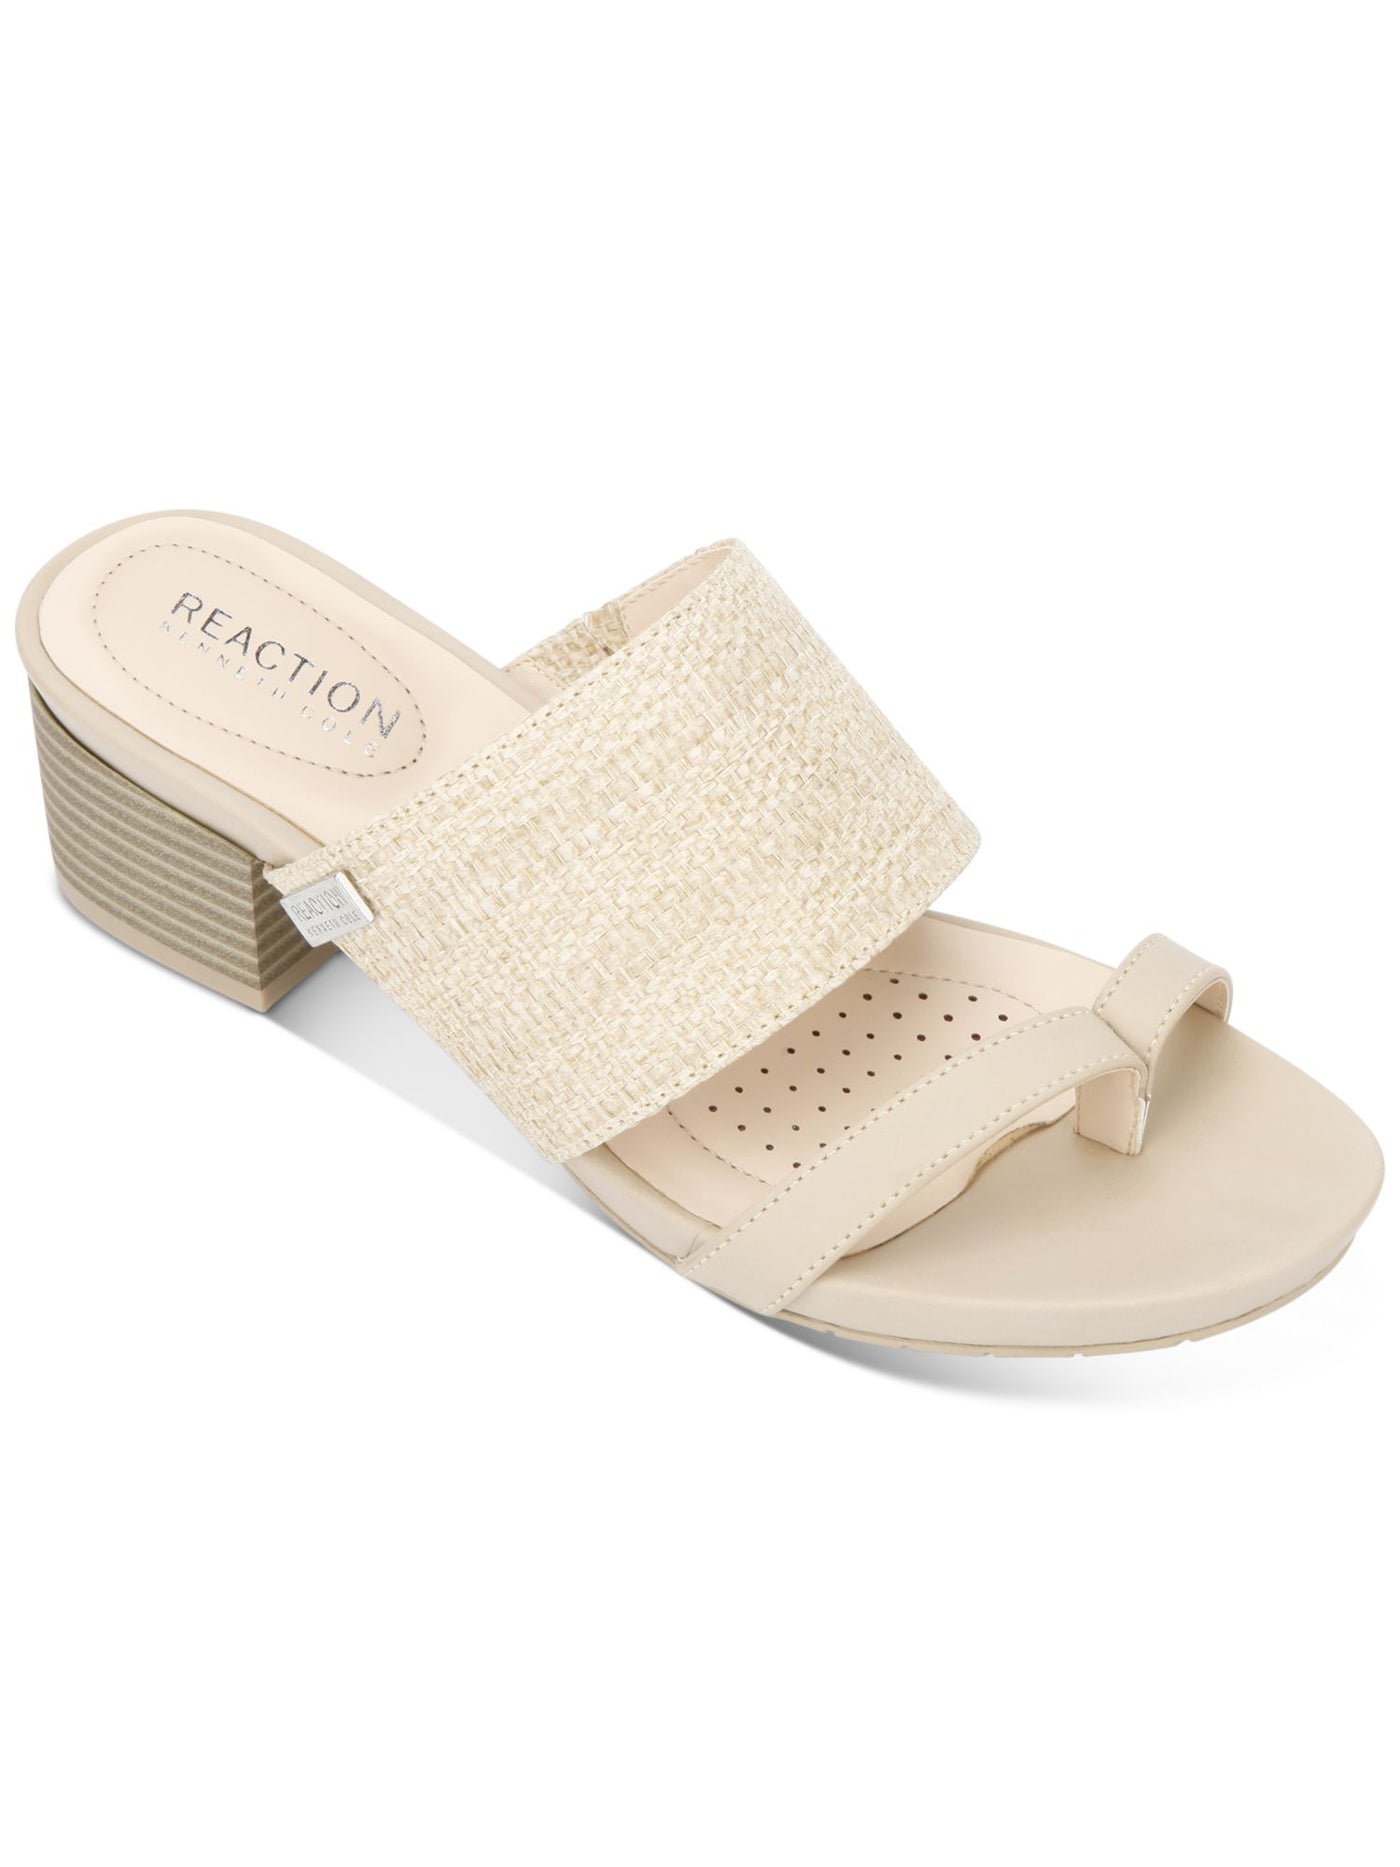 KENNETH COLE Womens Beige Woven Toe Loop Cushioned Logo Late Mule Round Toe Block Heel Slip On Thong Sandals Shoes 7.5 M